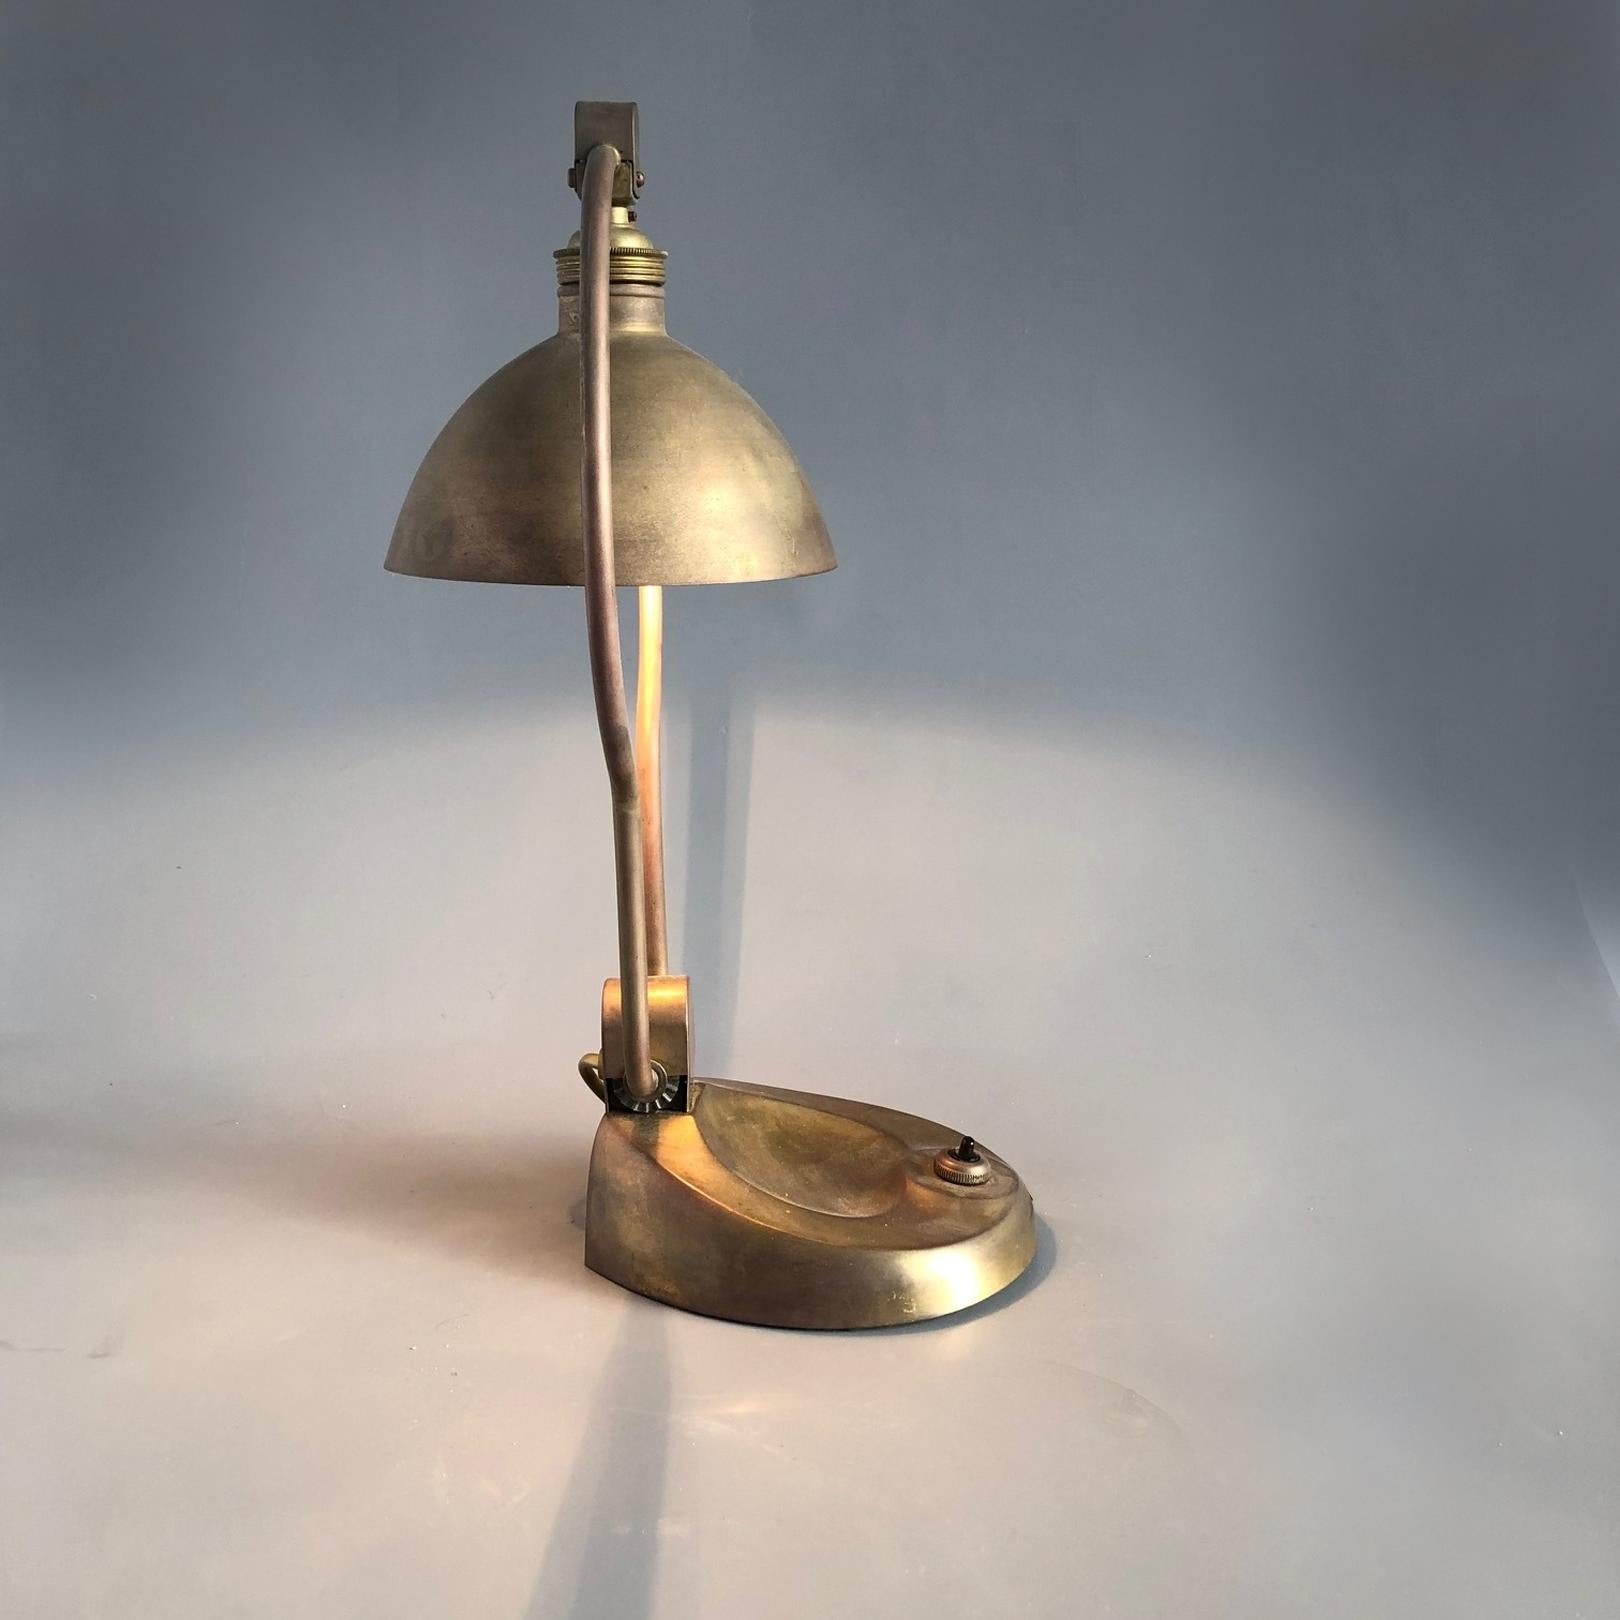 Spun Vienna Secession Brass Table Lamp, 1900s For Sale